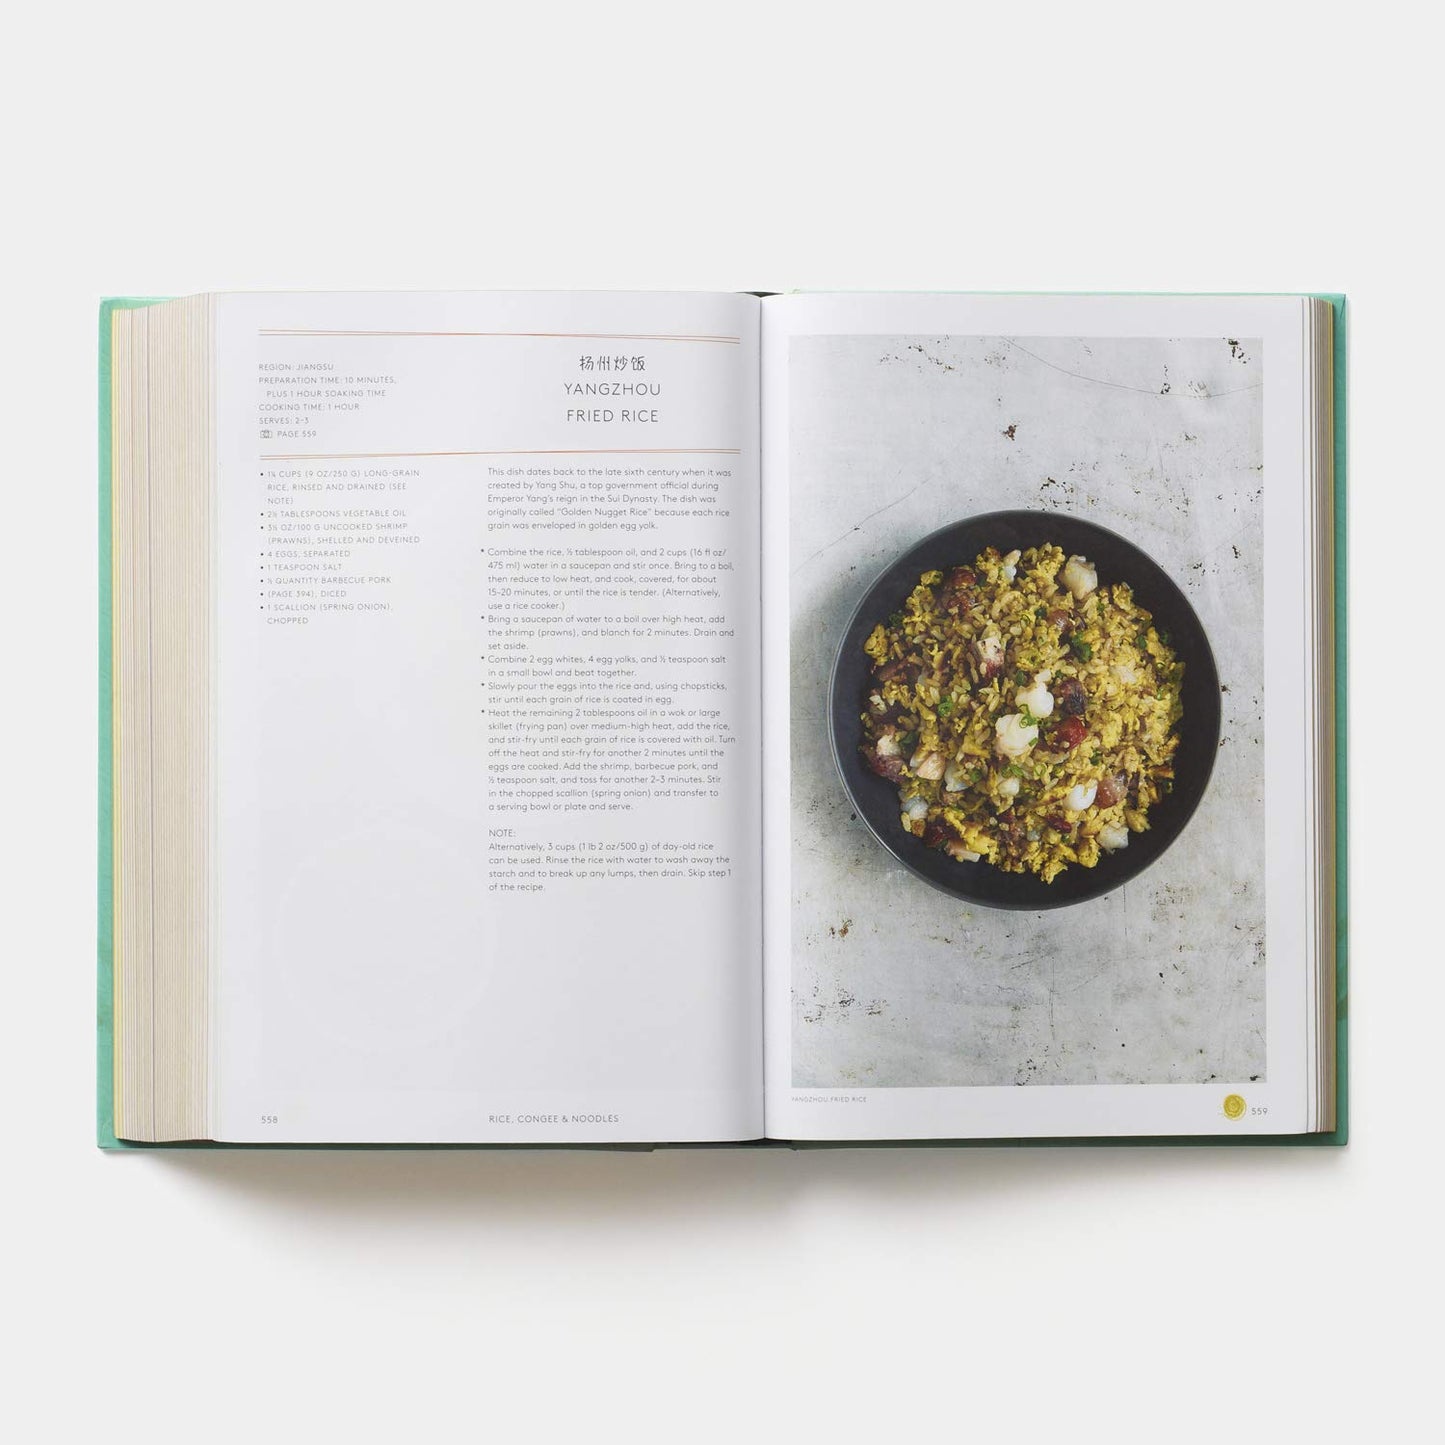 China: The Cookbook (Hardcover)